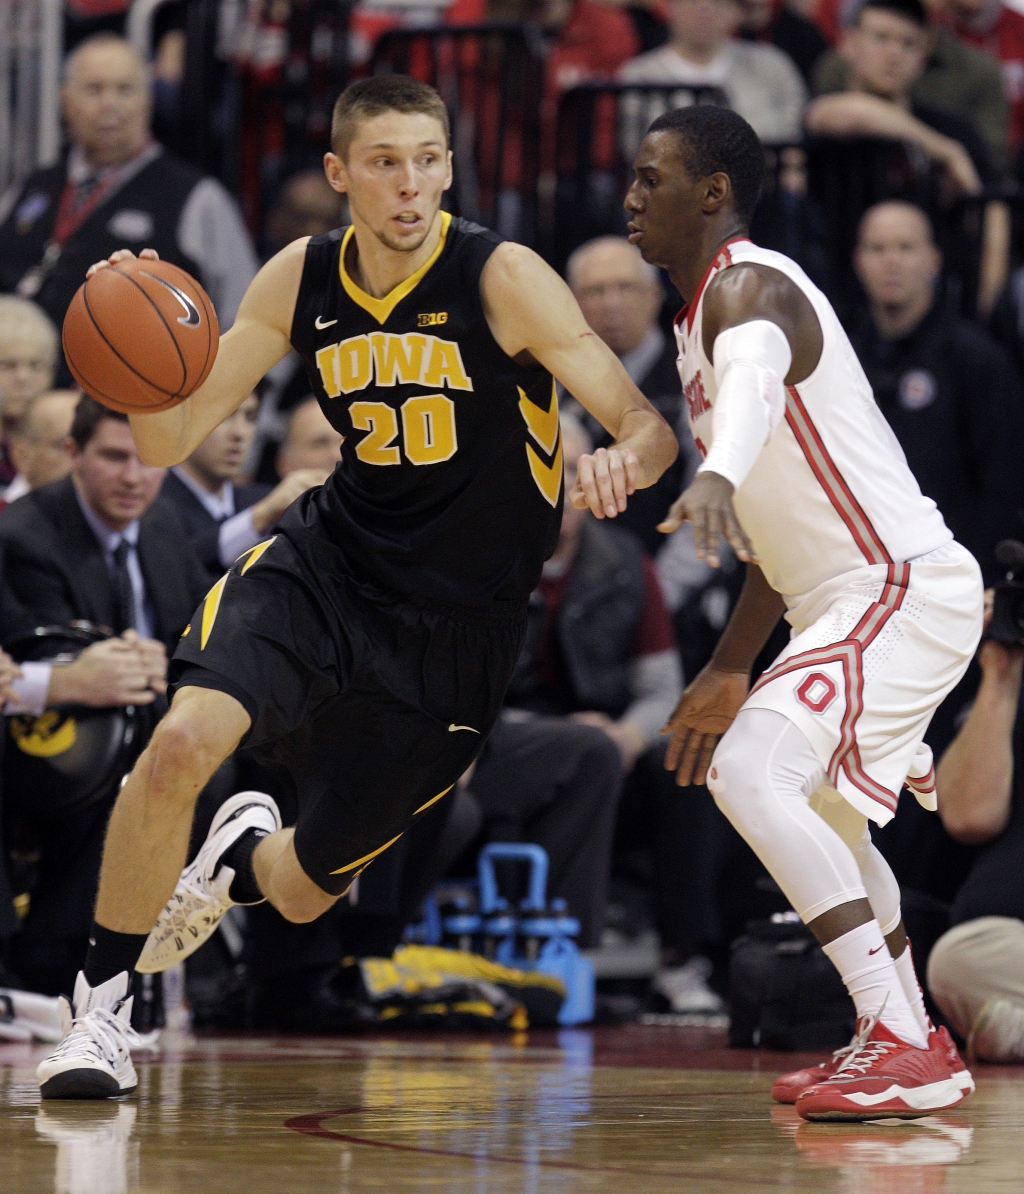 Jarrod Uthoff and the Iowa Hawkeyes are undefeated in Big Ten play having already beaten Michigan State twice this season